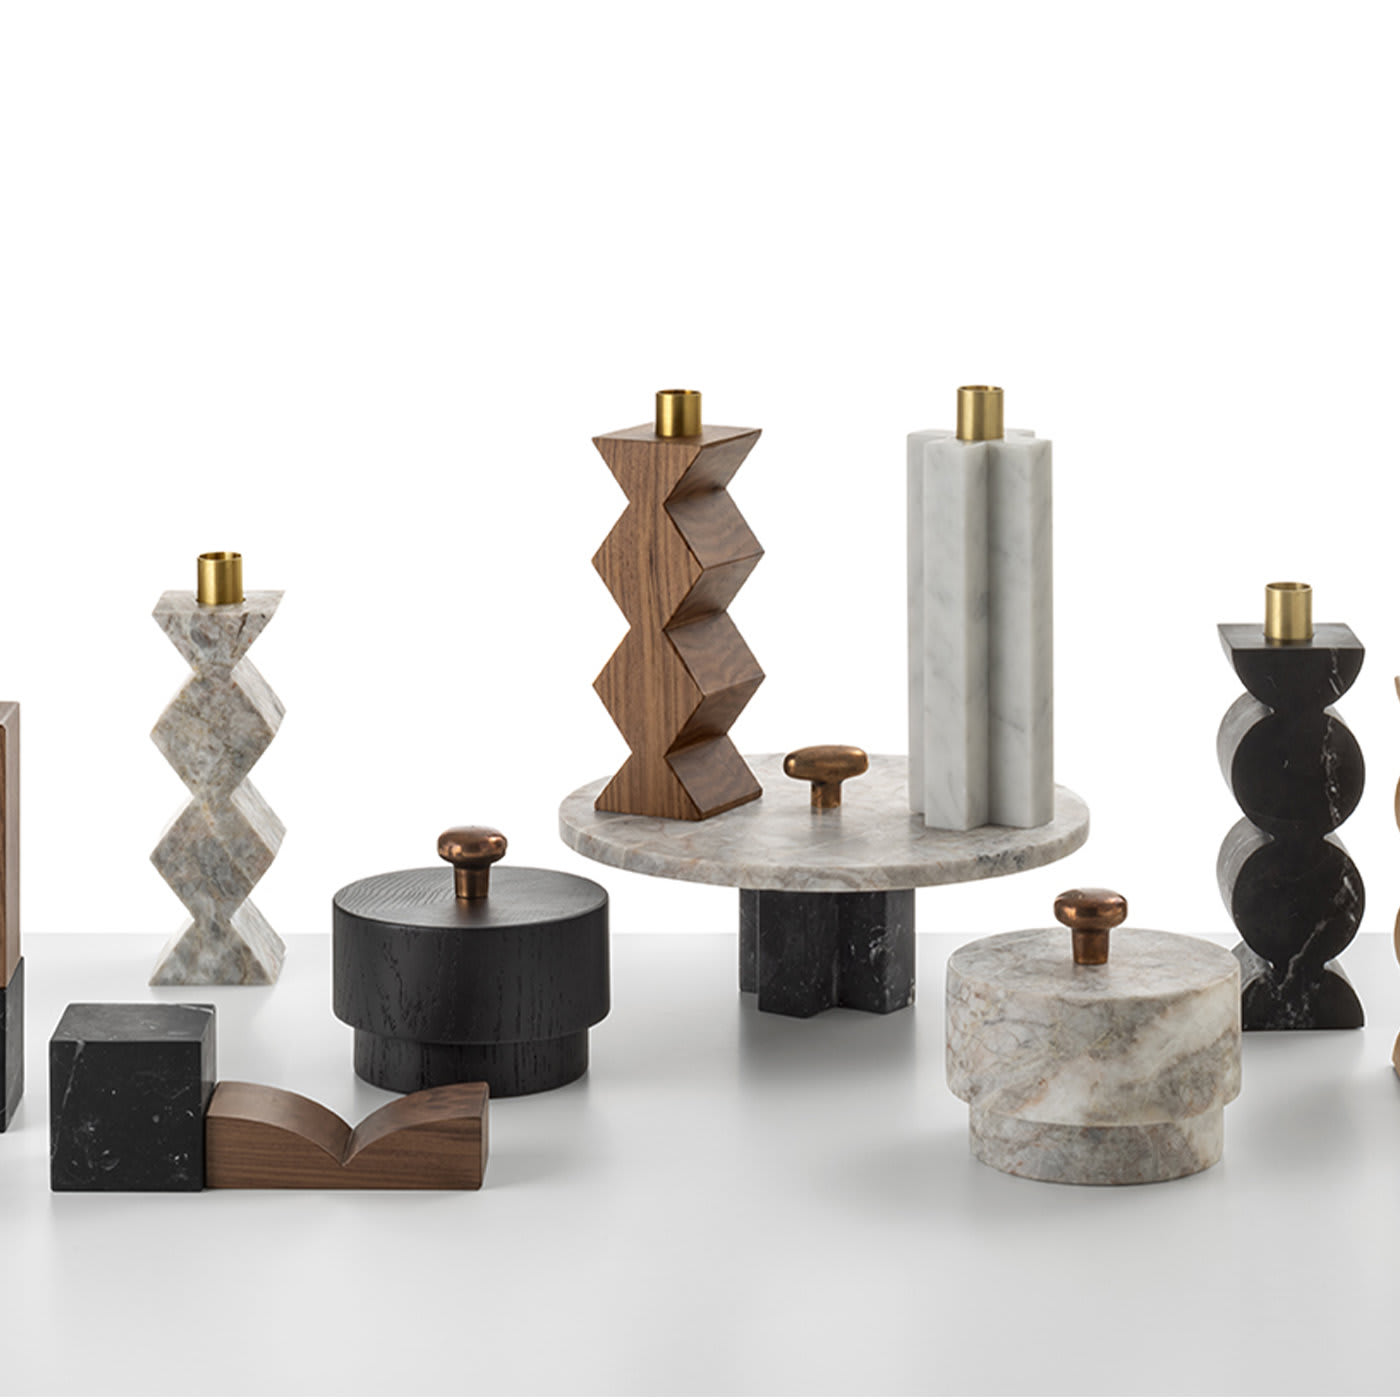 Constantin Walnut Candle Holder by Agustina Bottoni - Colé